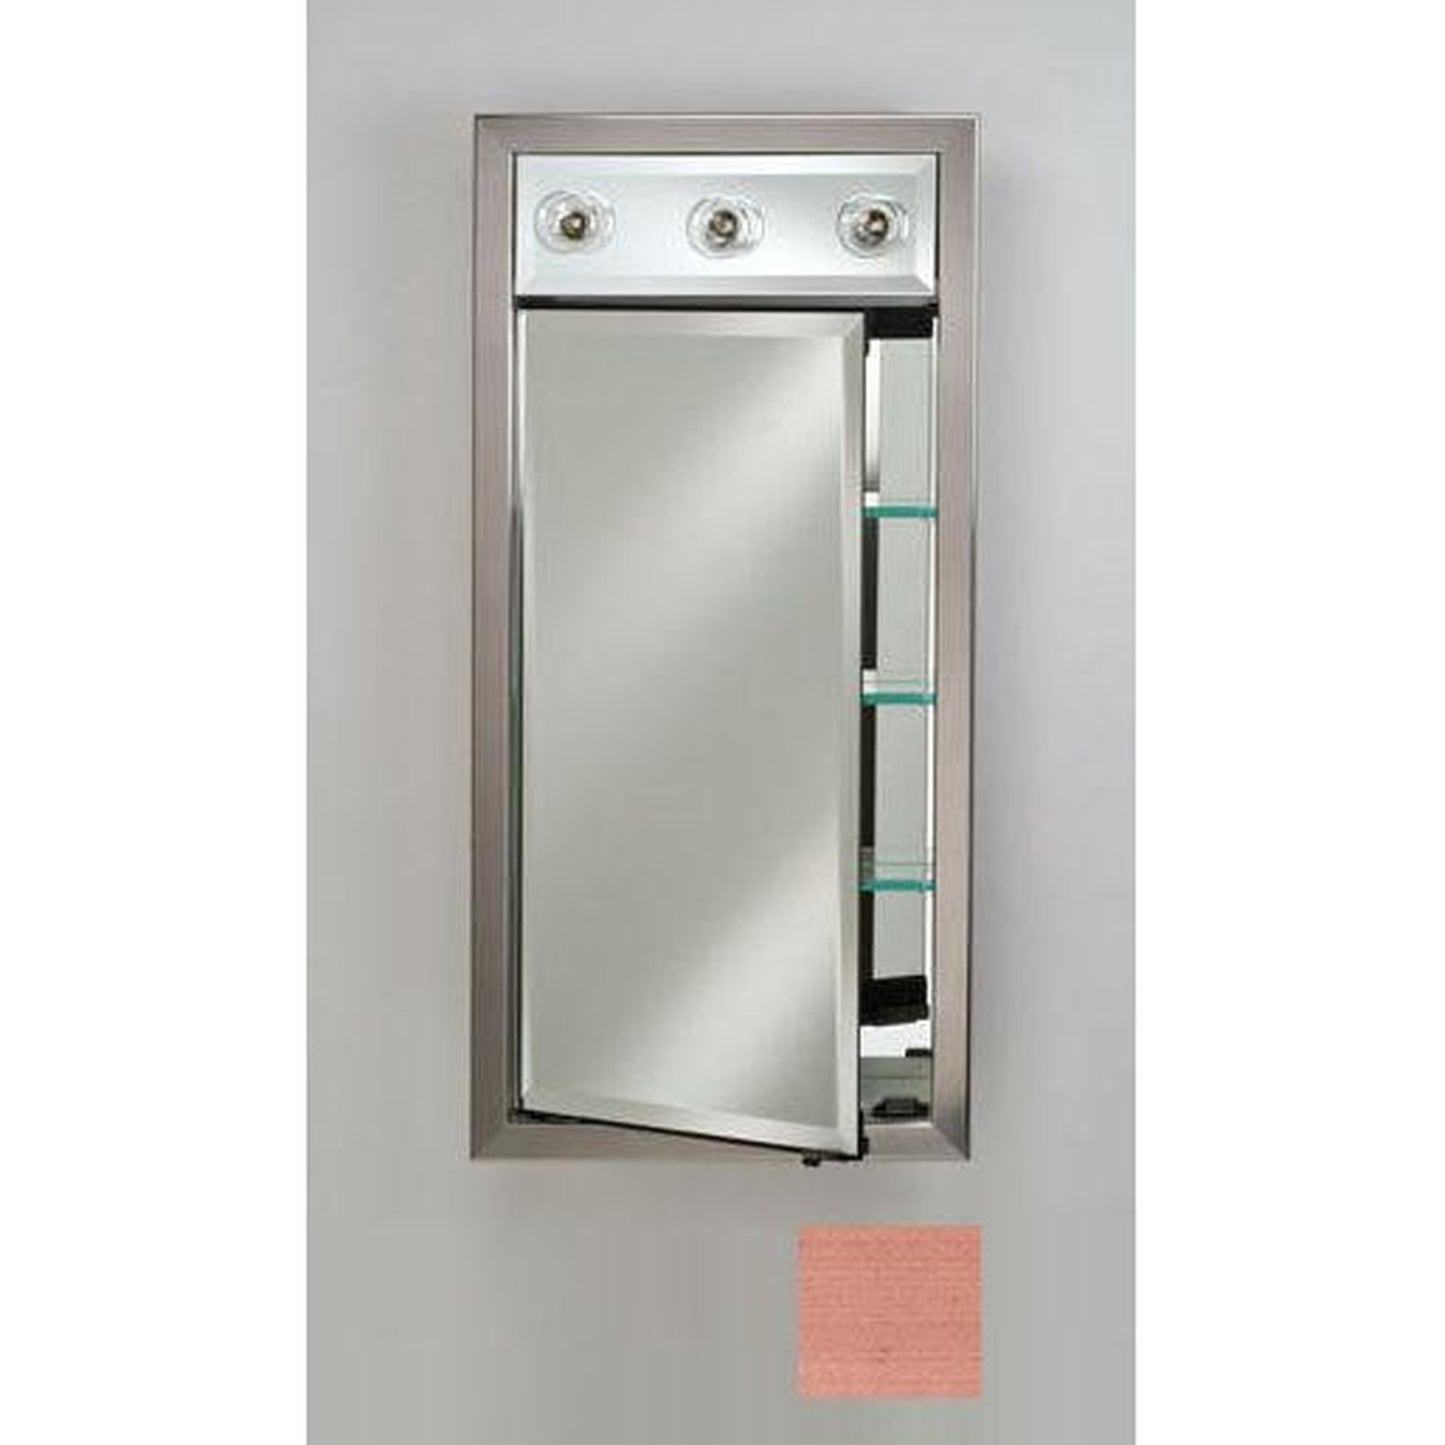 Afina Signature 17" x 34" Soho Brushed Bronze Recessed Right Hinged Single Door Medicine Cabinet With Contemporary Lights